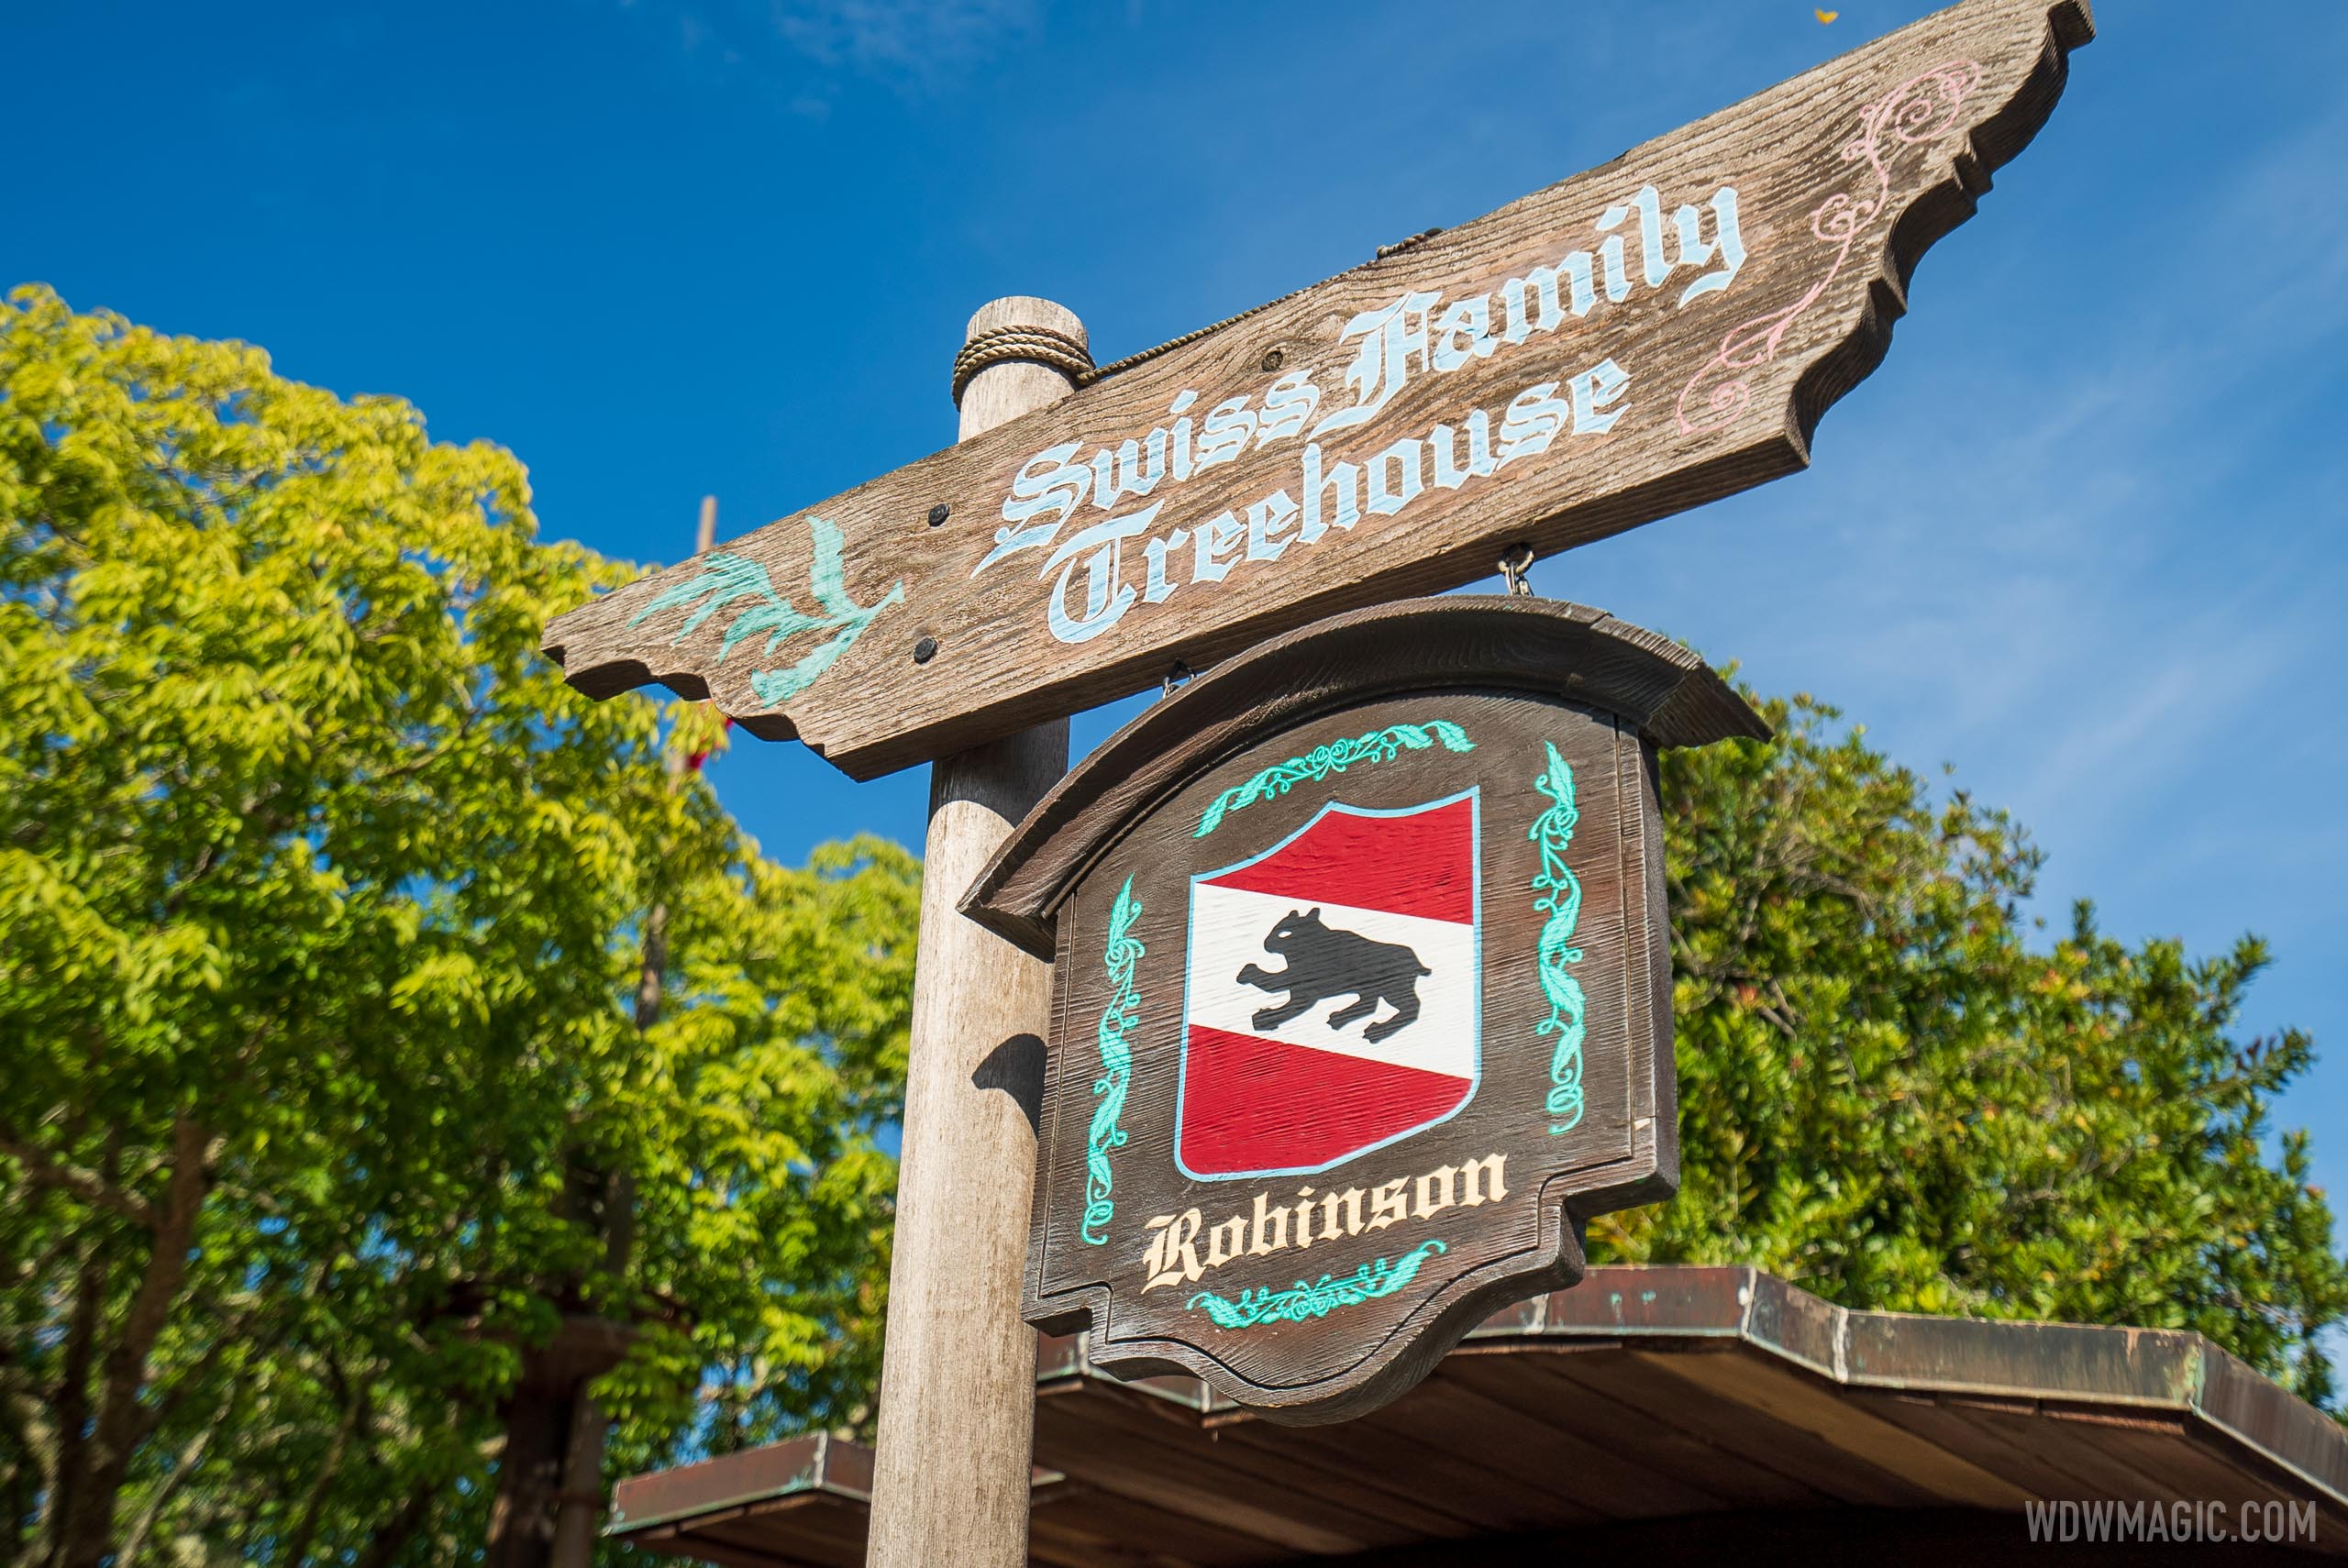 Short refurbishment planned for the Swiss Family Treehouse in March 2021